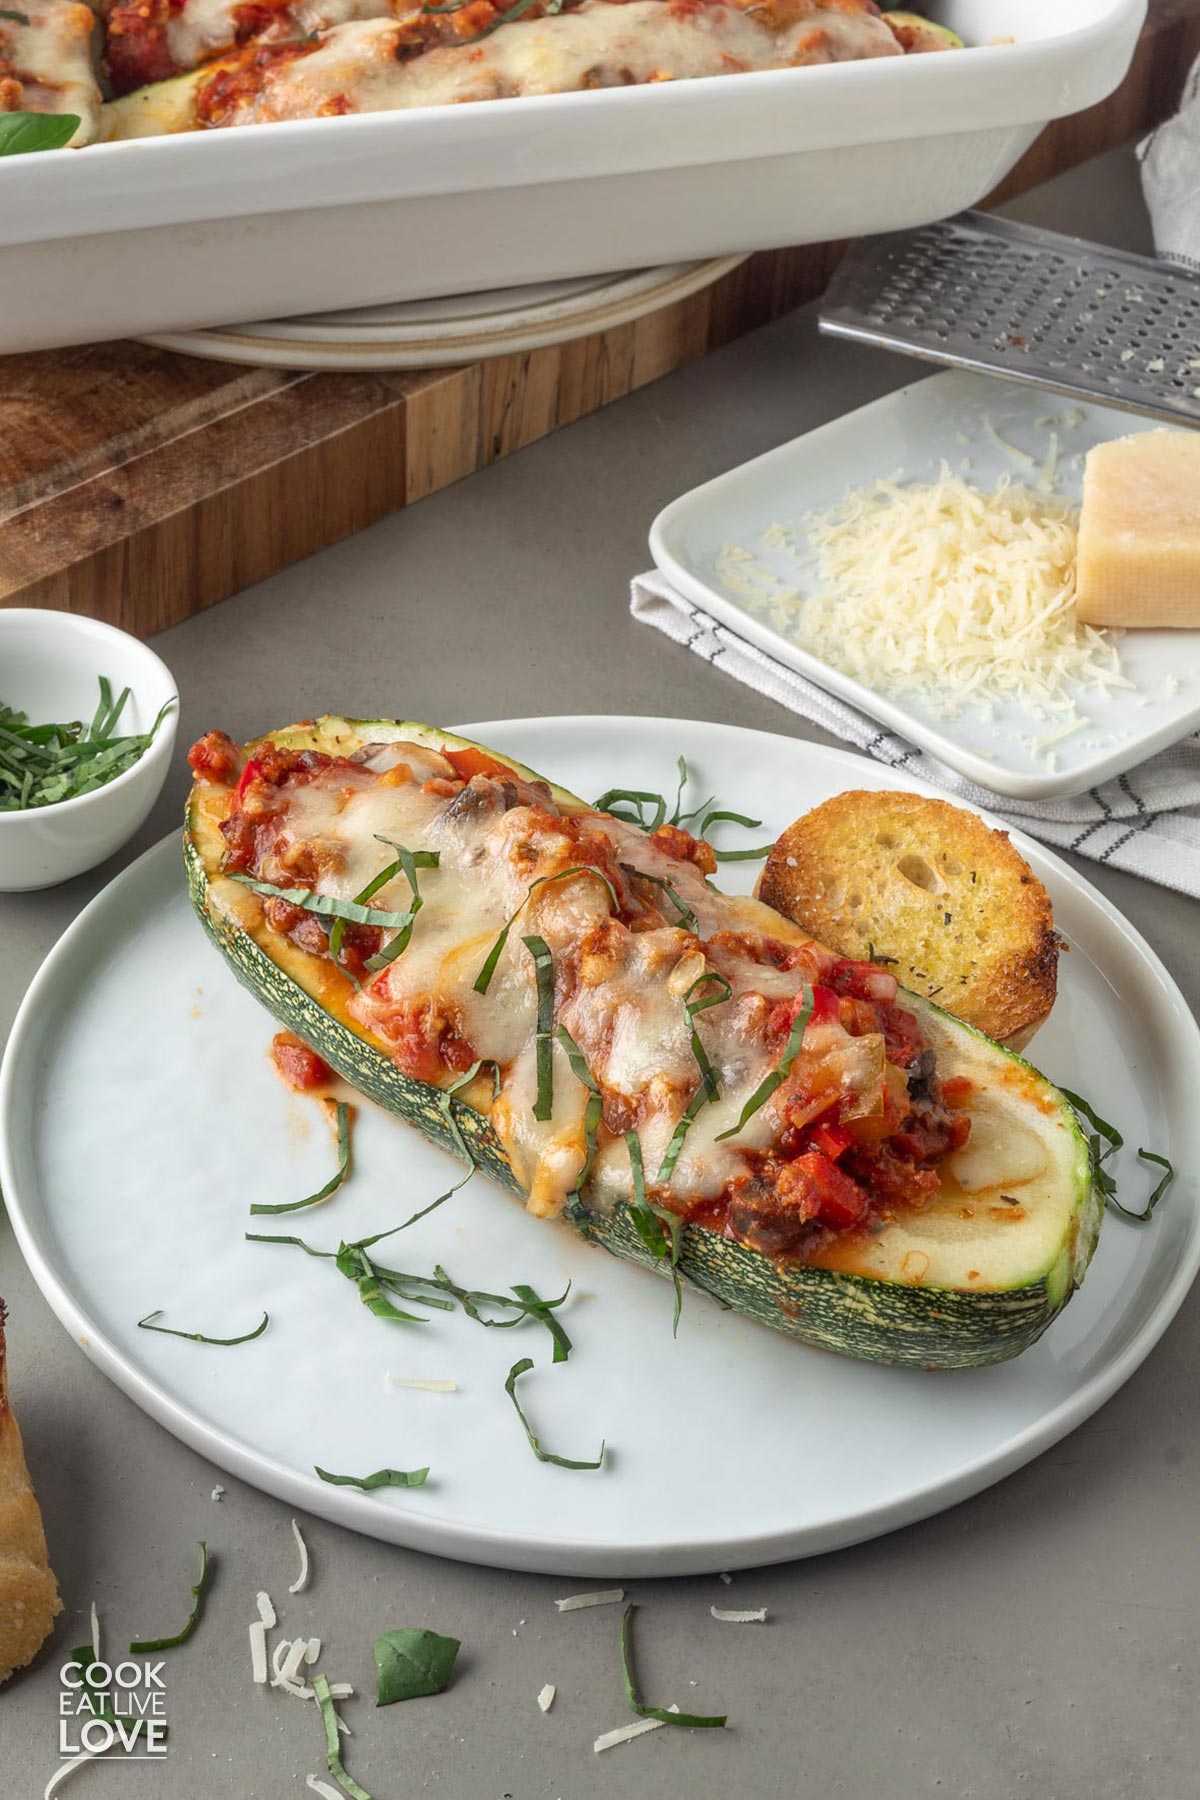 Stuffed vegetarian zucchini served up on a plate with the casserole dish in the back and a plate of parmesan.